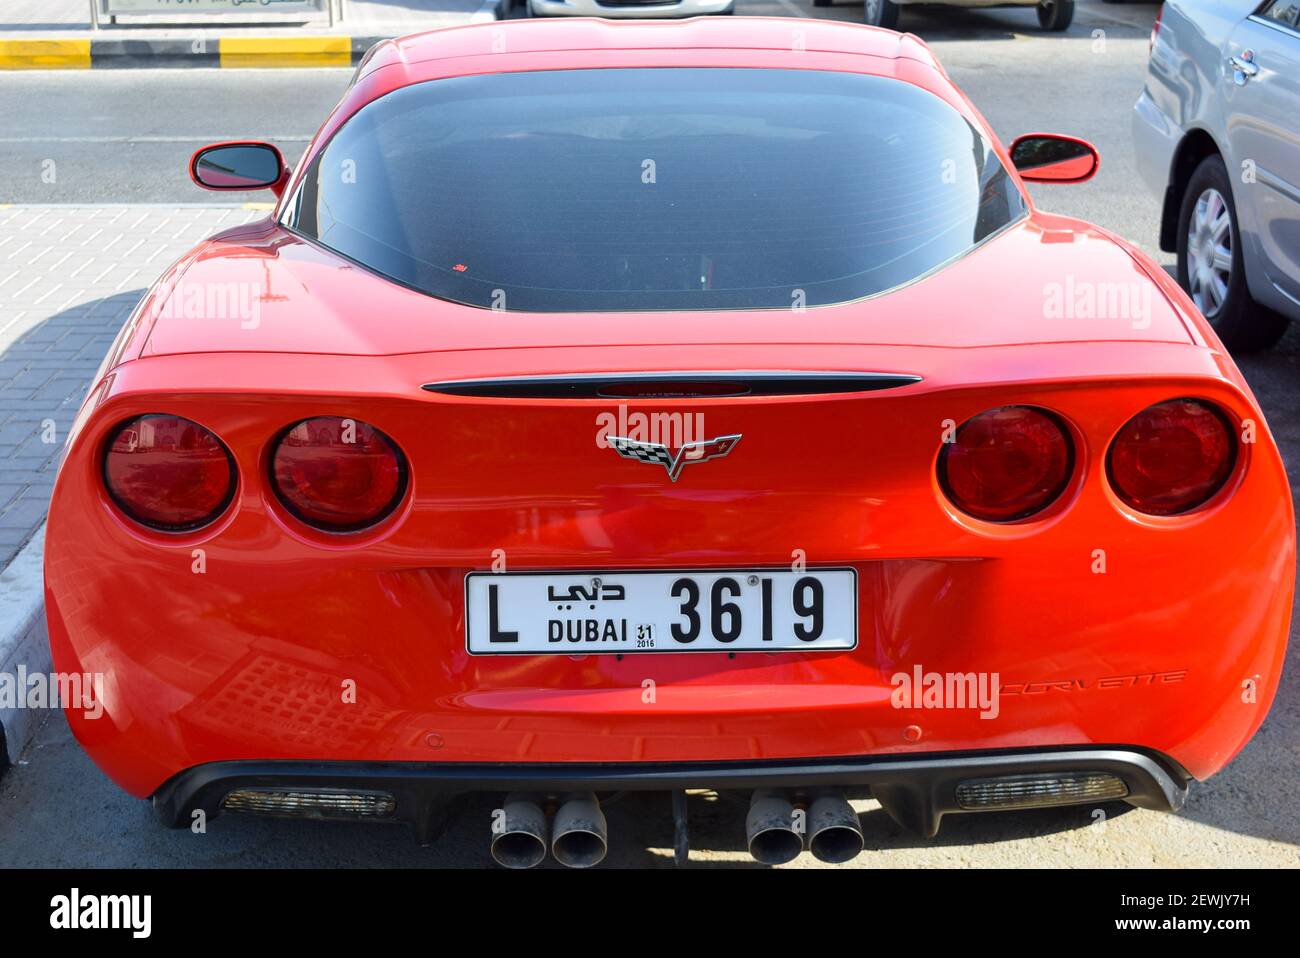 Back view of a red Chevrolet Corvette. Car exterior details Stock Photo